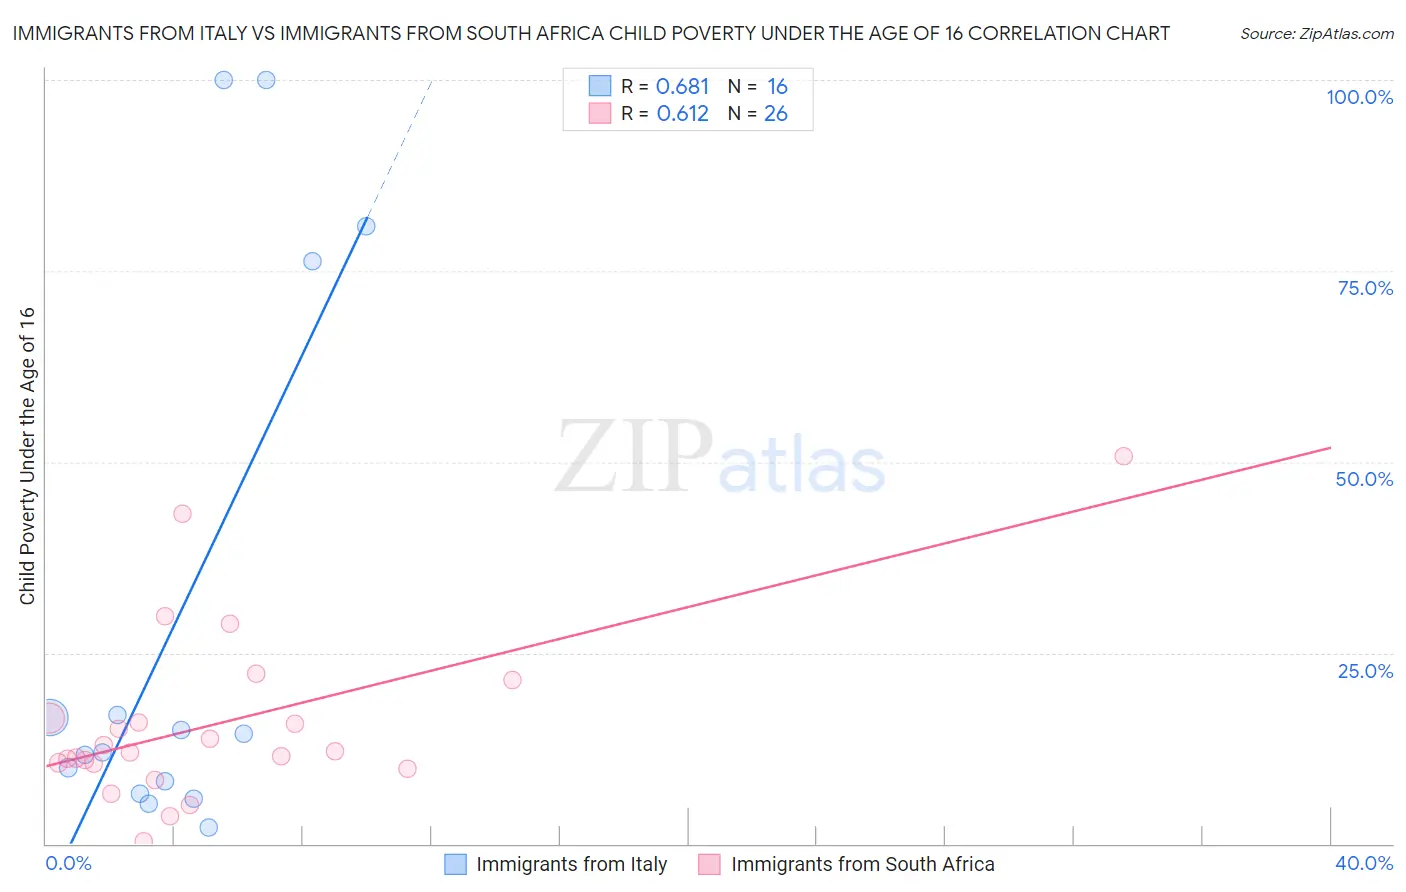 Immigrants from Italy vs Immigrants from South Africa Child Poverty Under the Age of 16